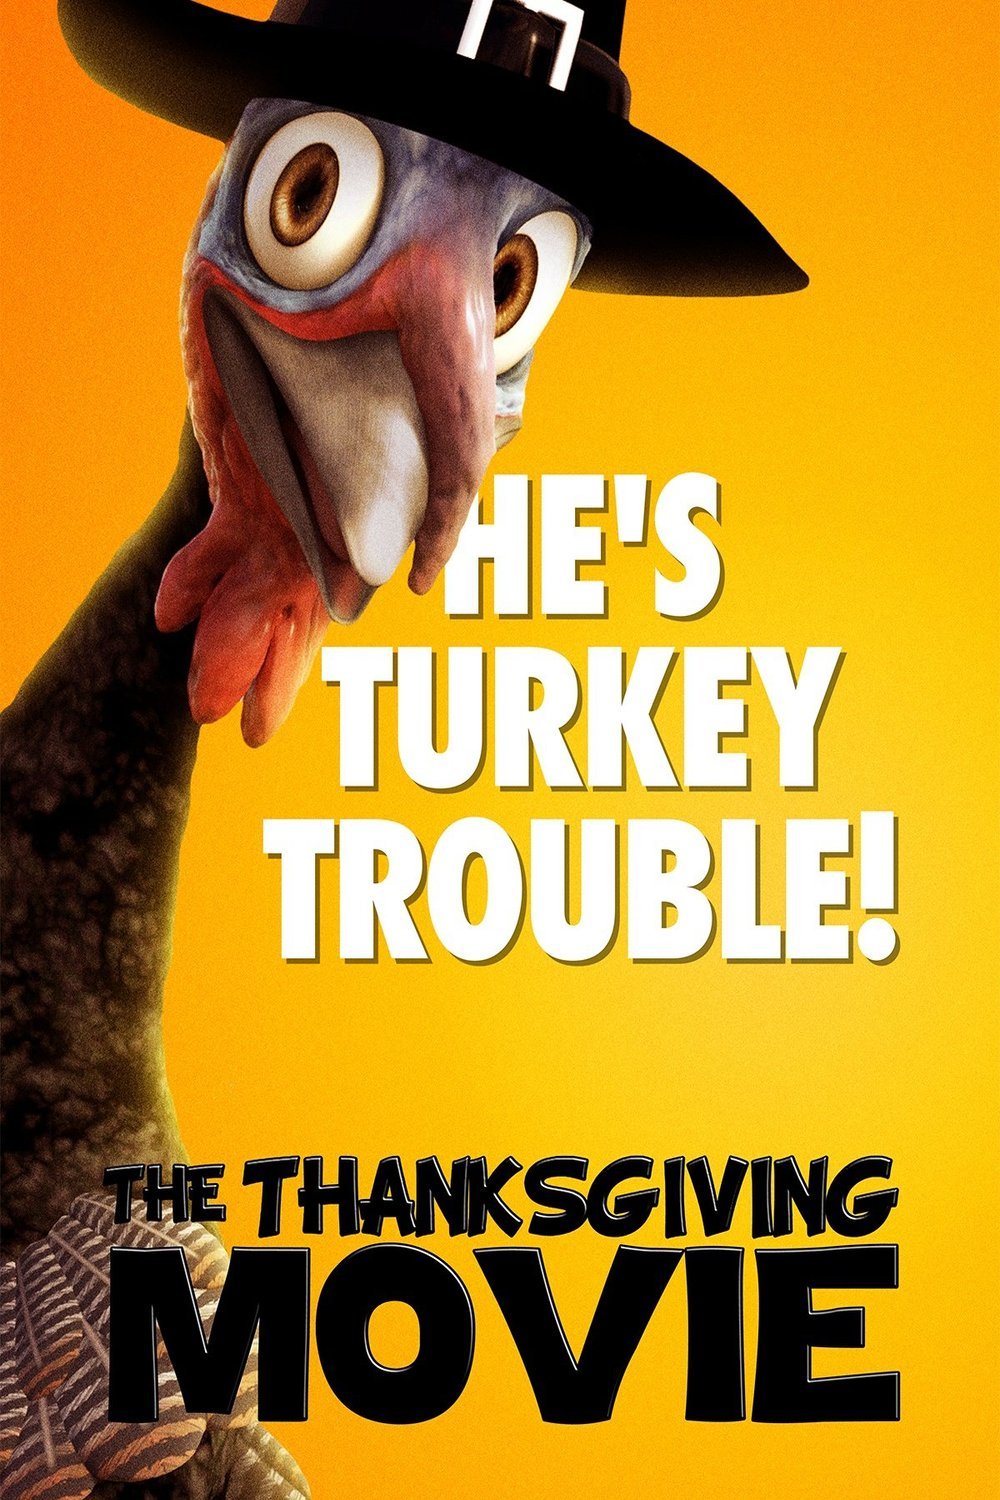 Poster of the movie The Thanksgiving Movie